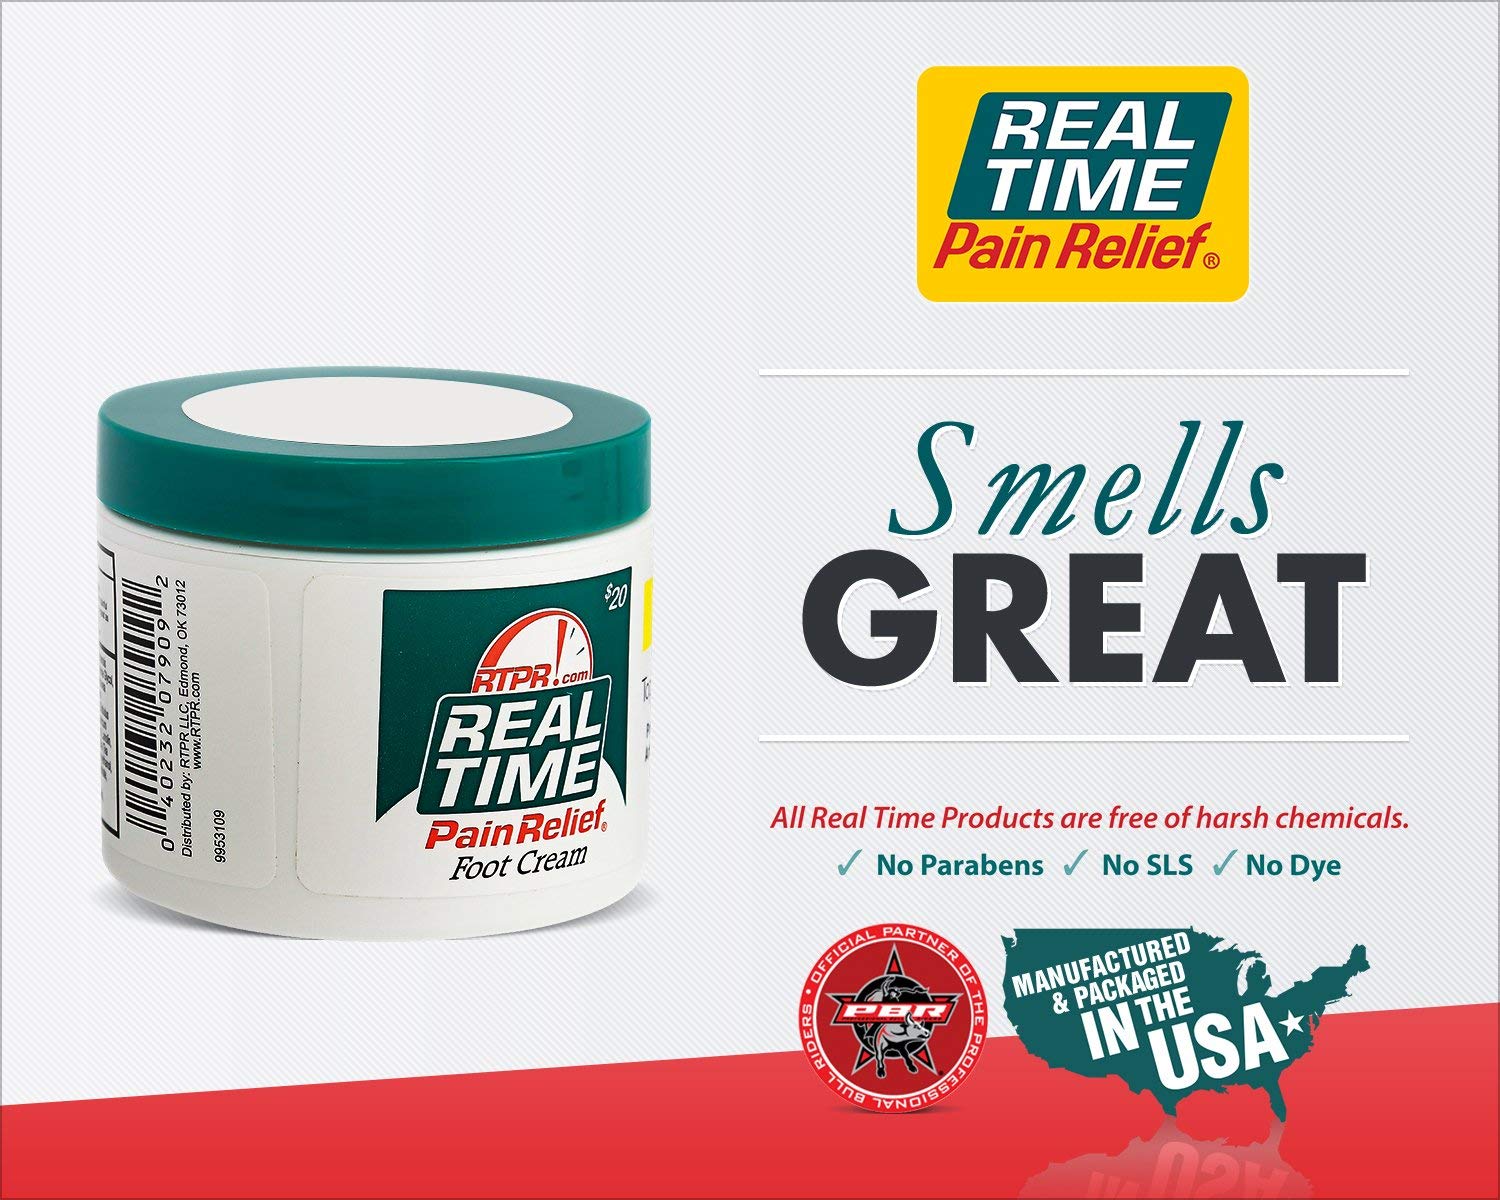 Real Time Pain Relief - Foot Cream 6